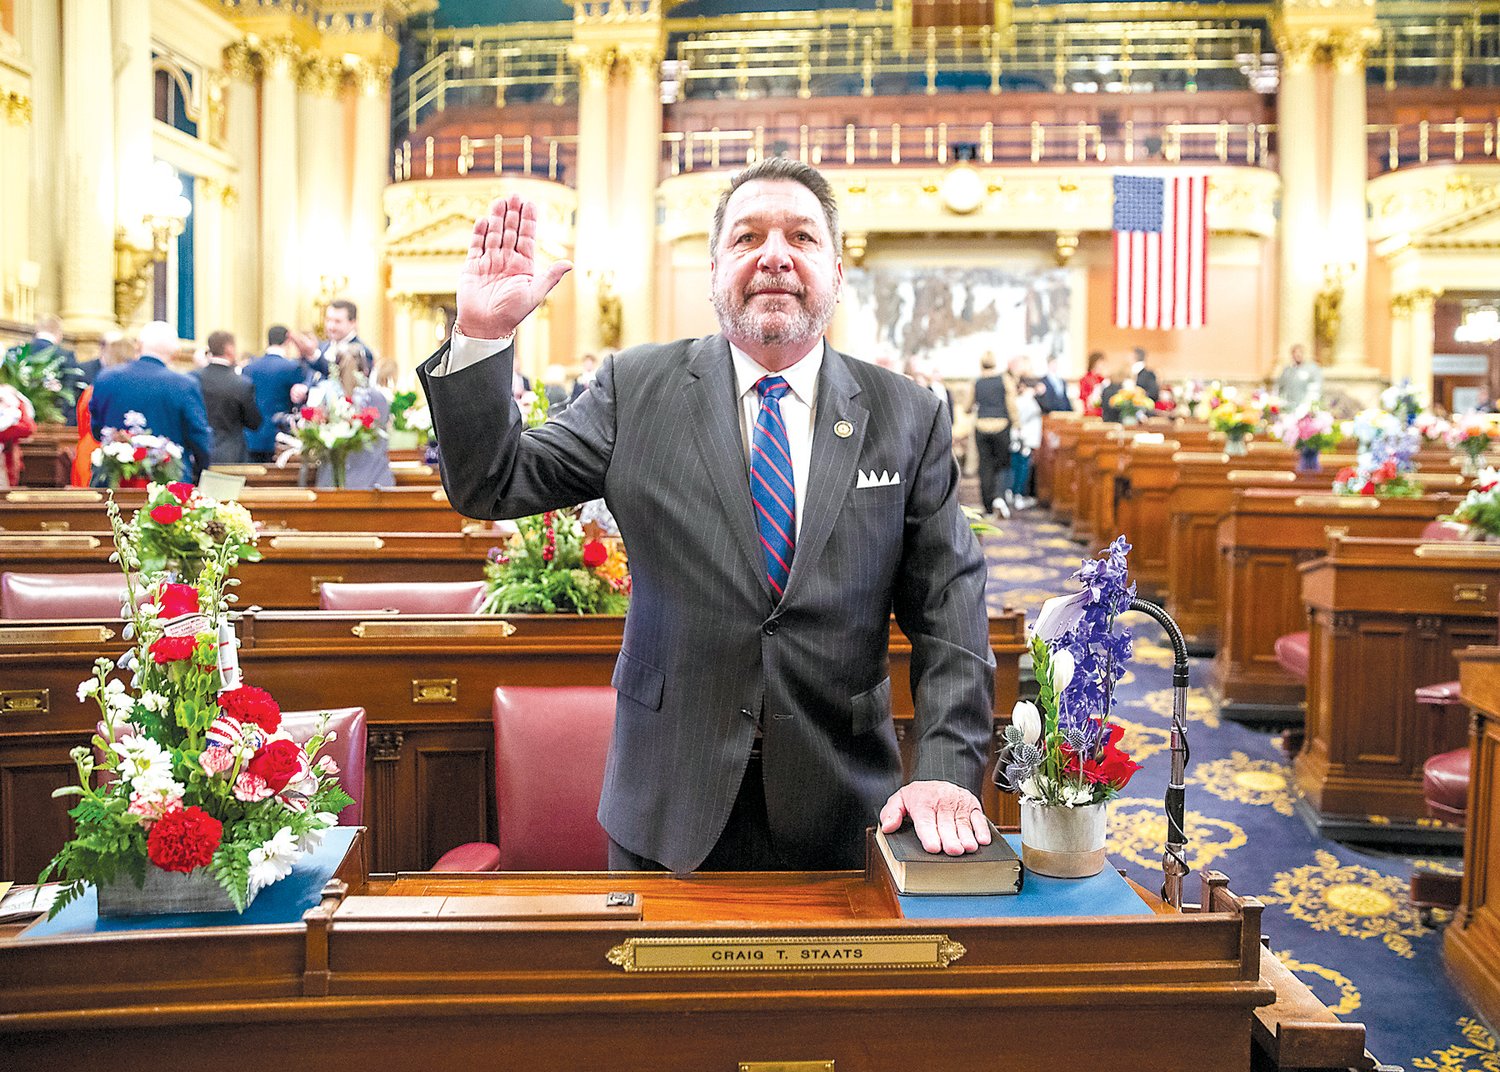 Rep. Craig Staats, a Republican, represents the 145th PA House District, which includes Bridgeton, Durham, East Rockhill, West Rockhill, Haycock, Milford, Nockamixon, Richland and Springfield townships as well as the boroughs of Quakertown, Richlandtown, Riegeslville, Trumbauersville and the Bucks County portion of Telford. Reach his district office at 215-536-1434.